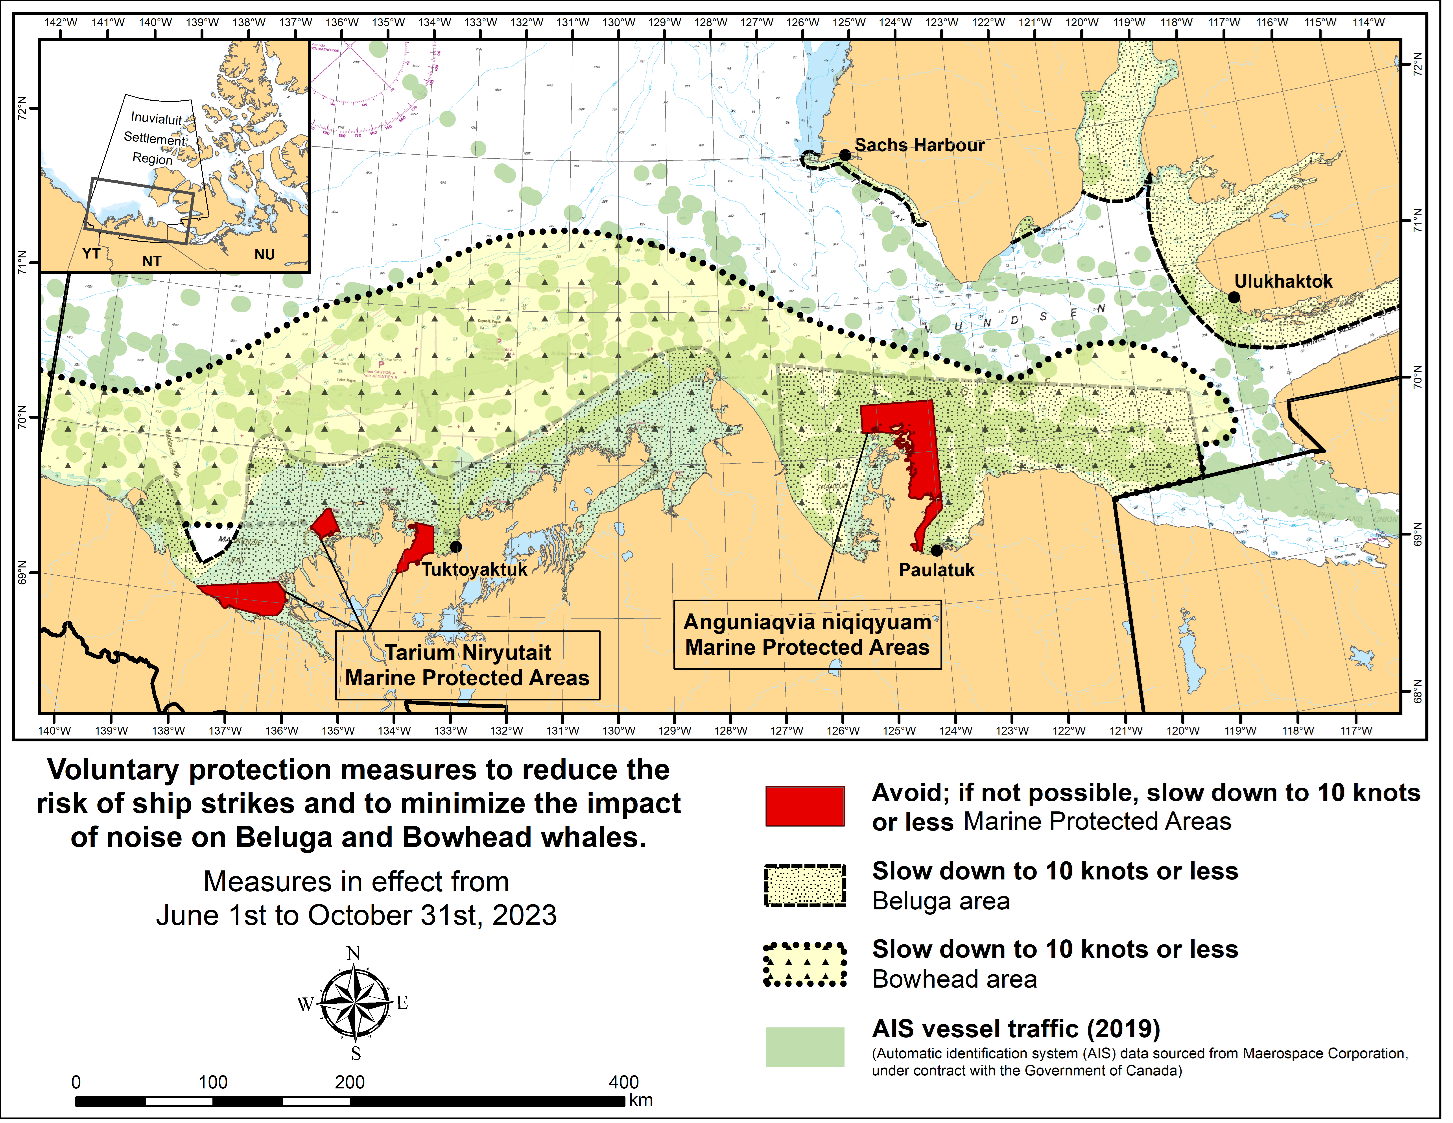 Map of the voluntary protection measures to reduce the risk of ship strikes and to minimize the impact of noise on beluga and bowhead whales. The map features the Tarium Niryutait Marine Protected Areas and the Anguniaqvia niqiqyuam Marine Protected Areas.